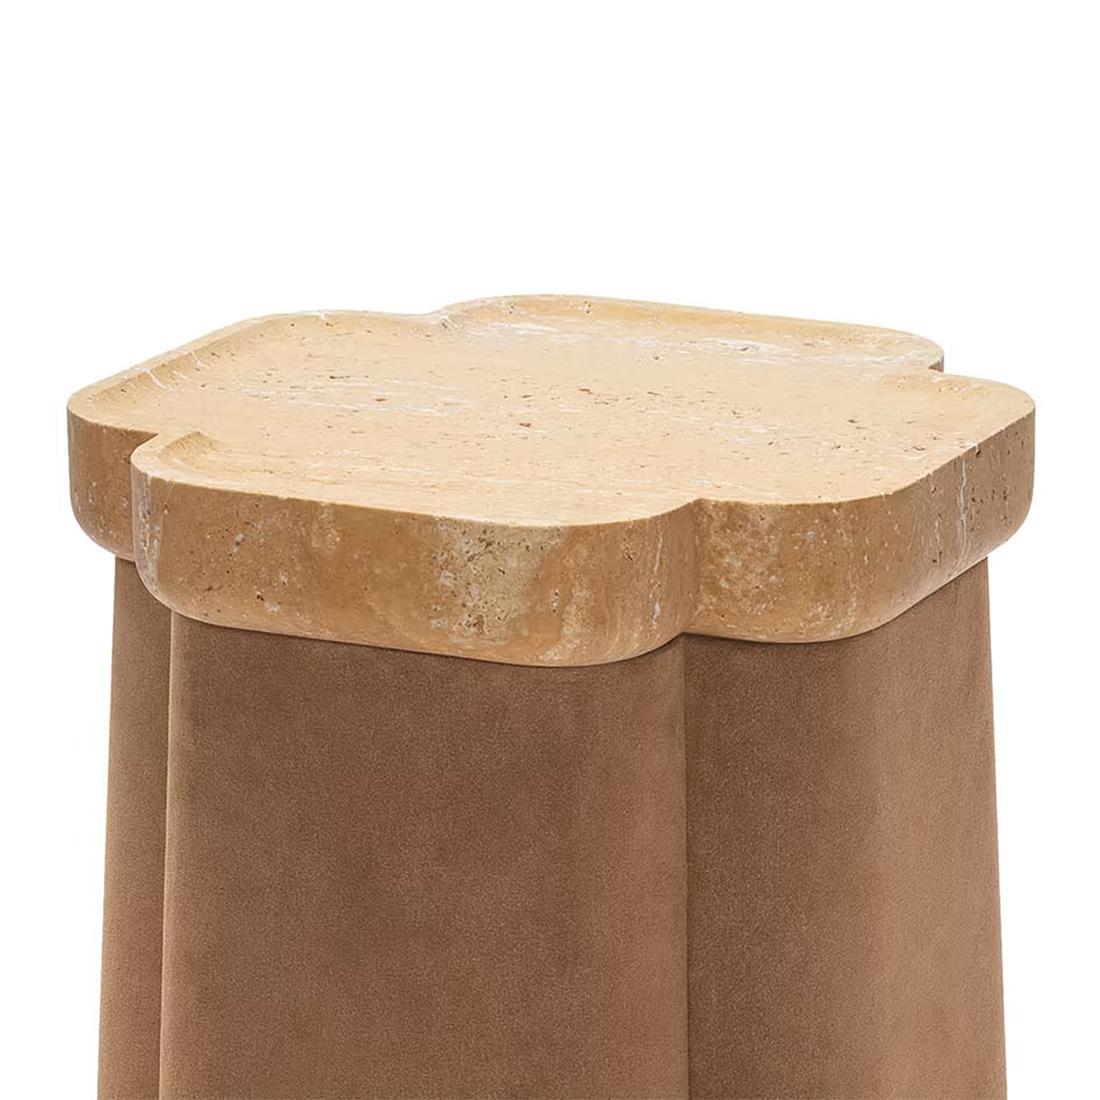 Side Table Elka with wooden structure covered with brown
genuine suede leather. With carved polished travertine top.
Also available with other leather or suede leather colors, 
on request.